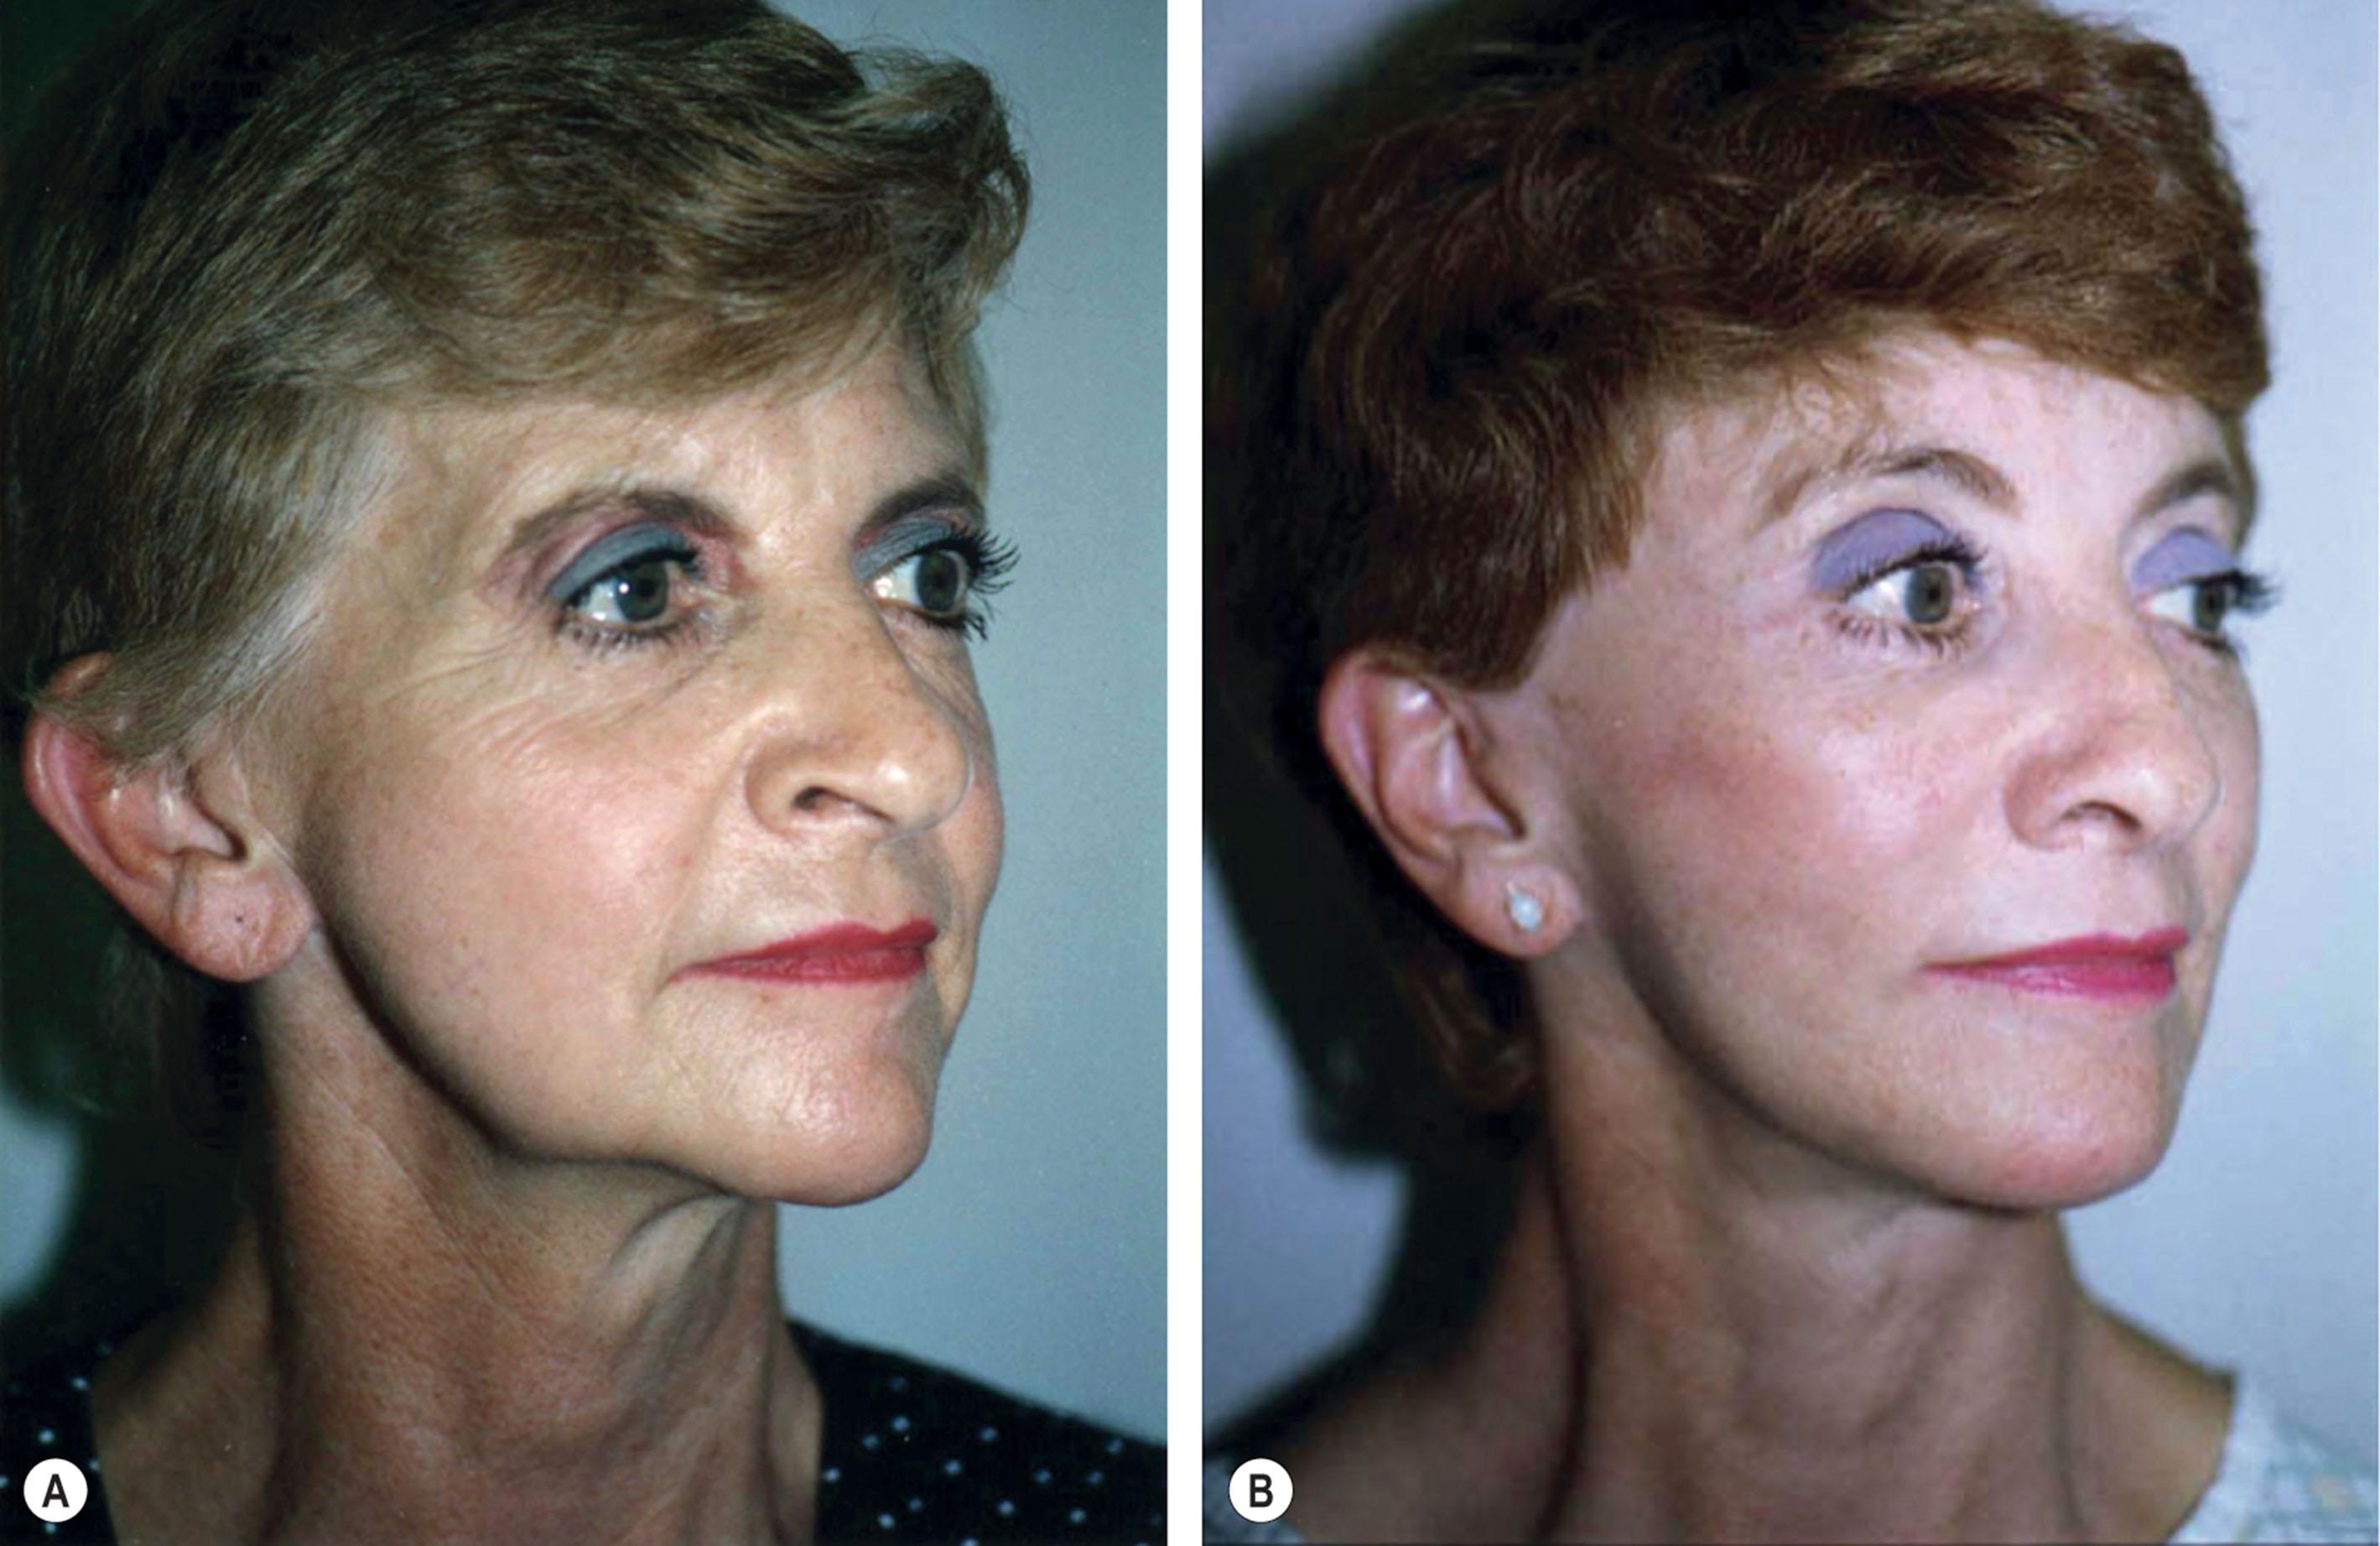 Figure 9.12.1, Skin lift and SMAS lift compared. Surgery does not arrest the aging process, and patients requesting secondary facelifts usually present with many of the same problems seen when they presented for their primary procedures. This is particularly true if the primary facelift was limited and consisted of skin excision and skin tightening only. (A) Patient age 61 seen after “skin only” facelift performed by an unknown surgeon (note scar in pretragal location). Residual problems seen include forehead ptosis, midface ptosis, heavy nasolabial folds, prominent labio-mandibular creases, cheek ptosis, infraorbital hollowing, malar flattening, jowl laxity, submental fat accumulation, and platysma band formation. Note that although some wrinkling and atrophy are present, the patient’s predominant problem is deep-layer tissue ptosis. Additional skin excision and tightening under these circumstances will be of little benefit to the patient. (B) Same patient seen age 63 after secondary facelift that used a high SMAS facelift technique. A forehead lift and necklift have also been performed The patient has more youthful facial contour and a soft, natural, and non-surgical appearance. Note elevation of eyebrow, elevation of lid–cheek junction, improved transition from the lower eyelid to the cheek, improved malar projection, softening of nasolabial fold, improved posture of the mouth, improved jawline contour, correction of residual jowl, and improved neck. Secondary procedure performed by Timothy Marten, MD, FACS.